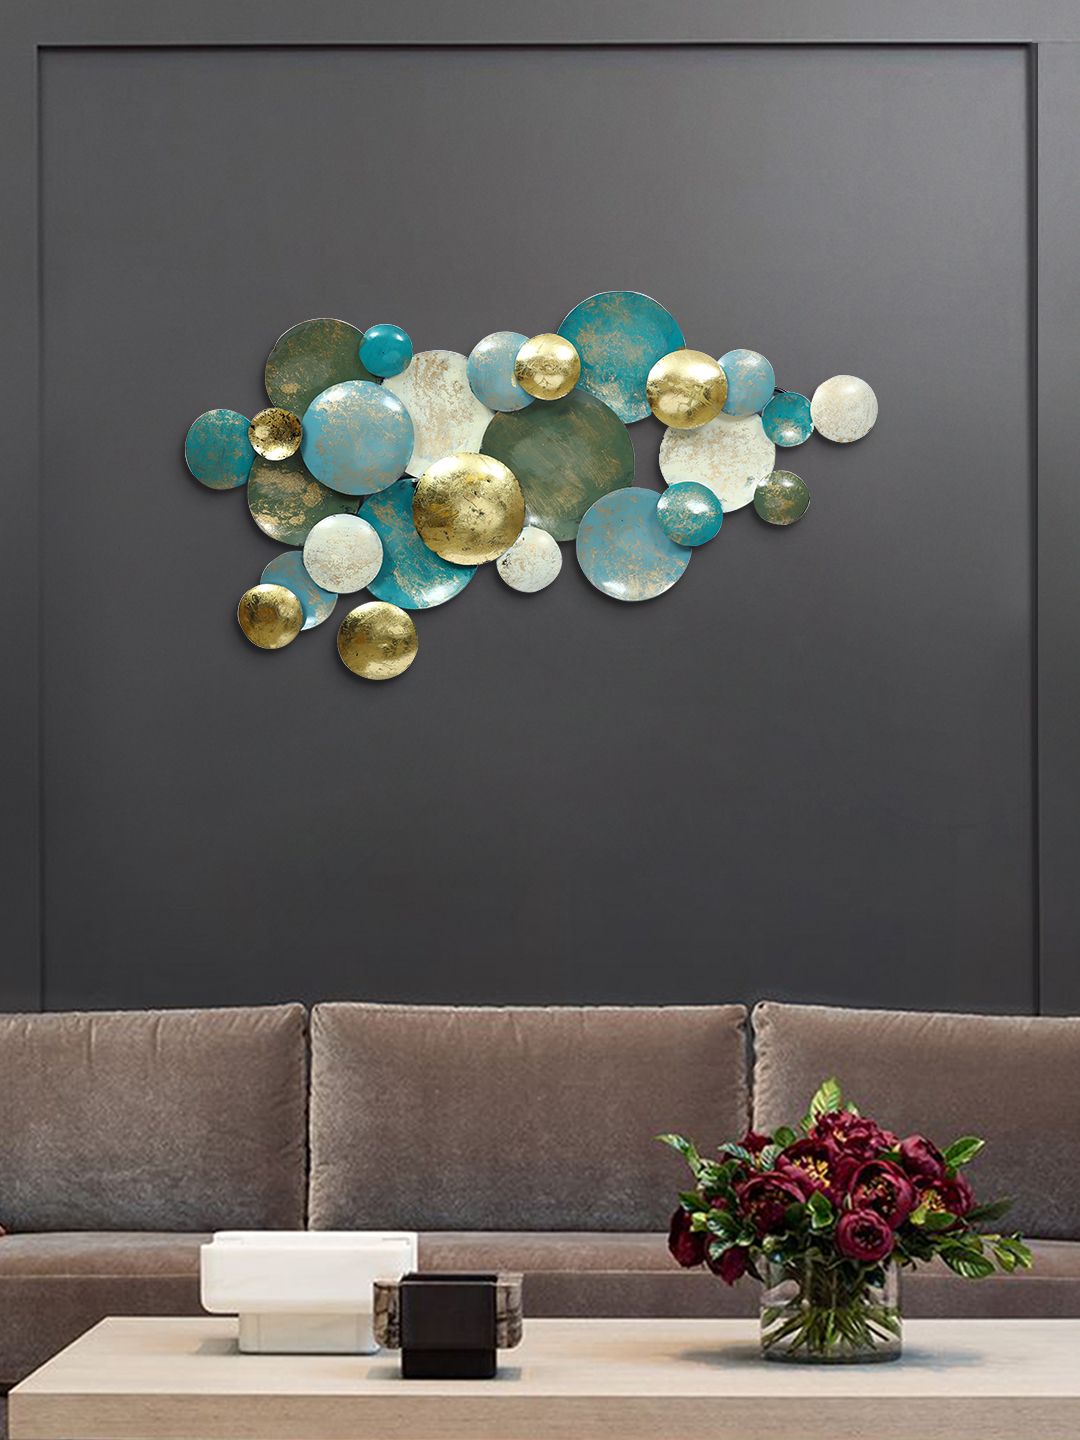 Aapno Rajasthan Green & Gold-Toned Contemporary Wall Decor Price in India